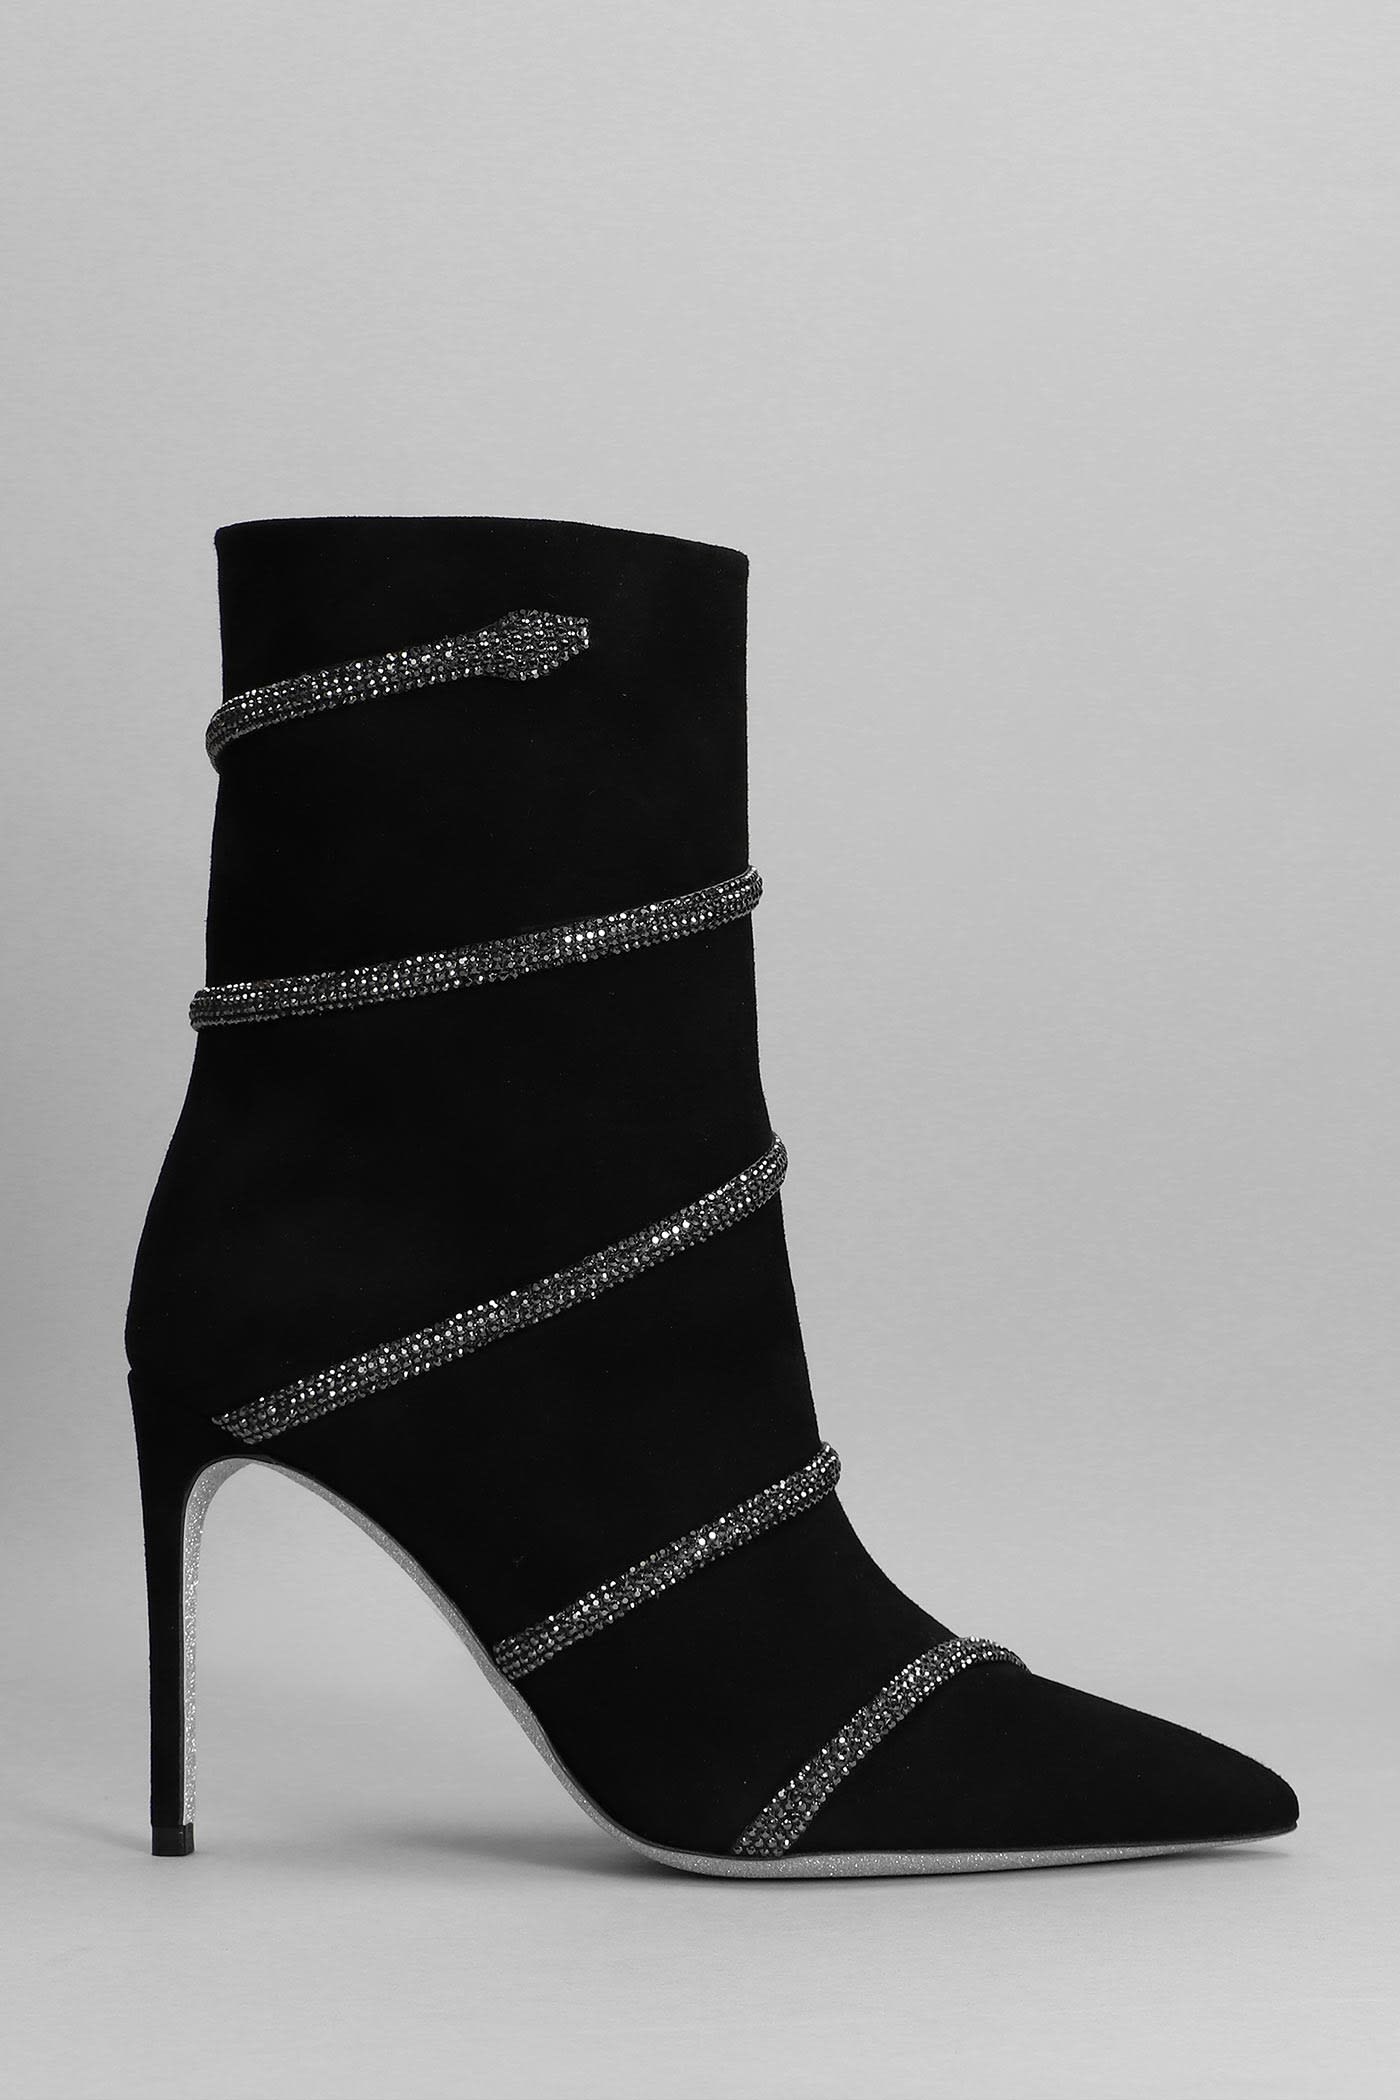 René Caovilla High Heels Ankle Boots In Black Suede